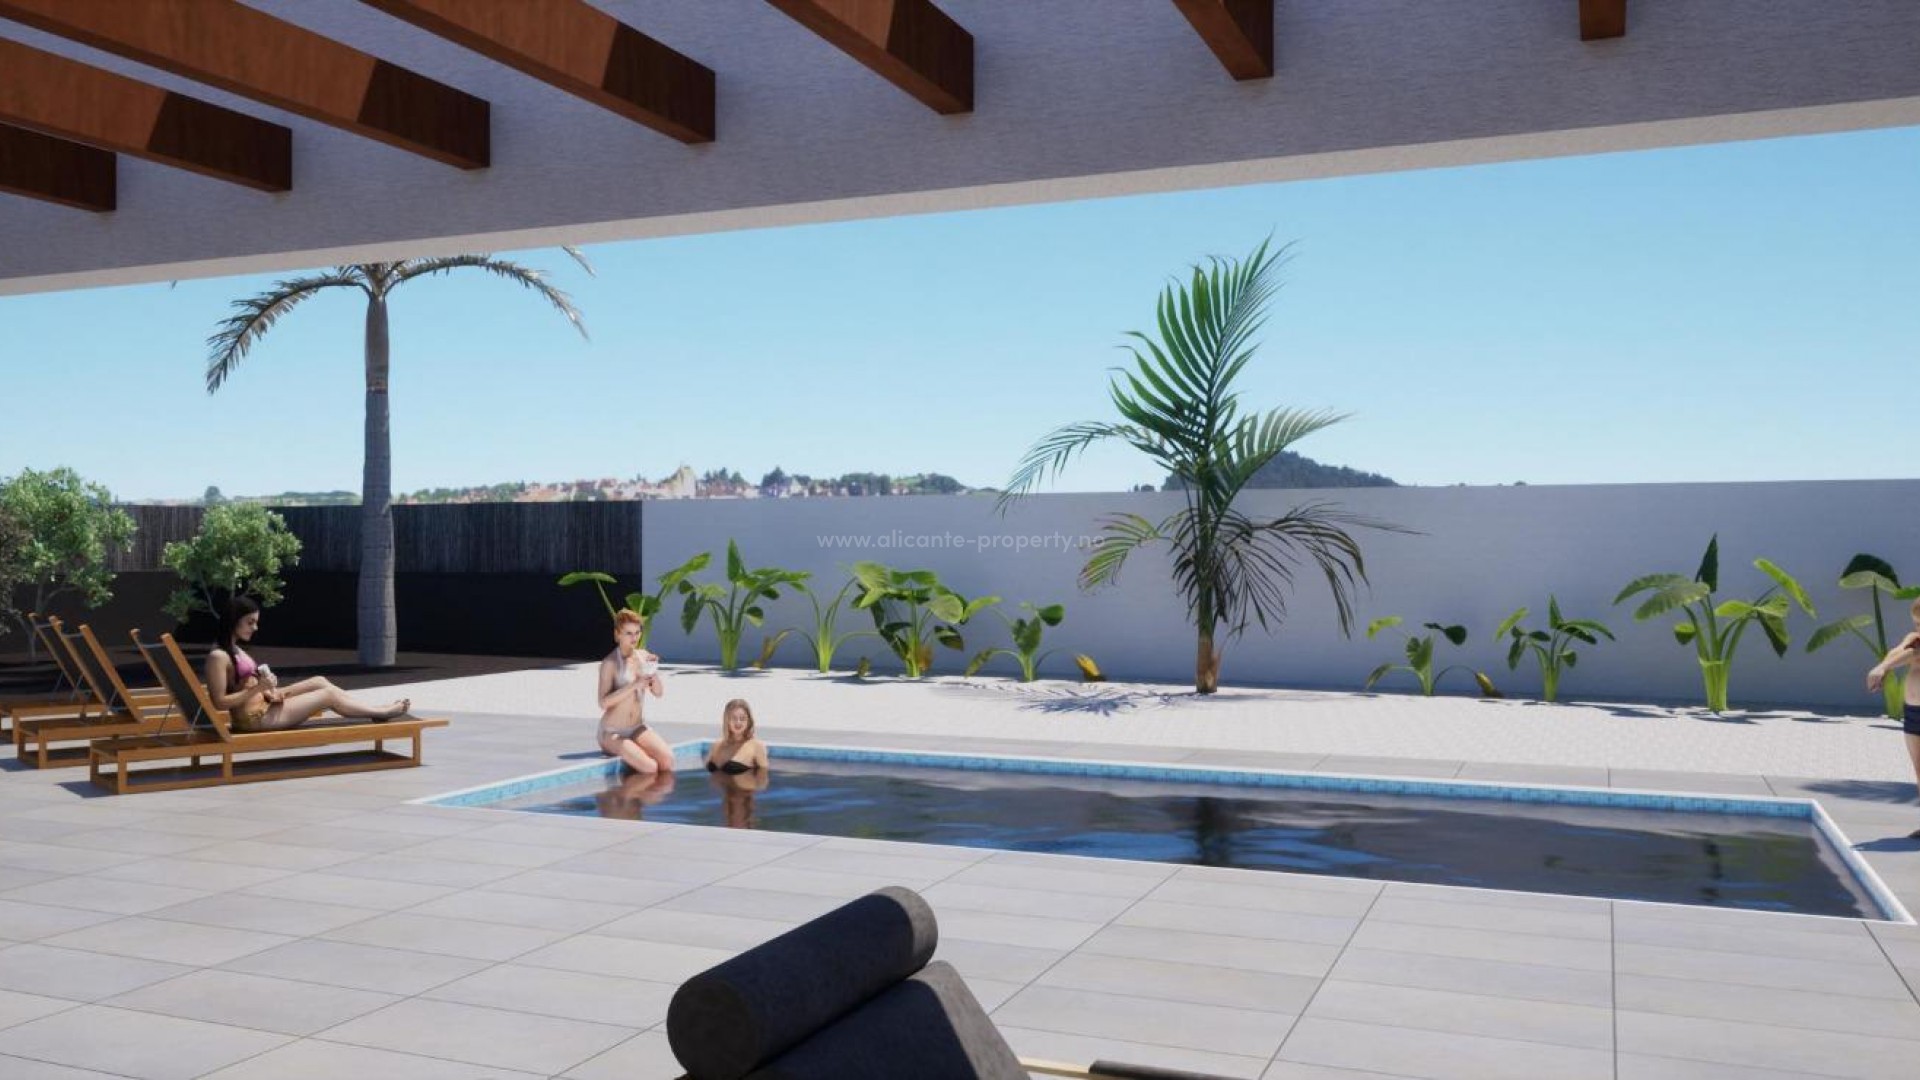 Brand new houses/villas in Alfaz del Pi, 3 bedrooms, 2 bathrooms, a very large living room plus dining room and American kitchen, large patio with pool